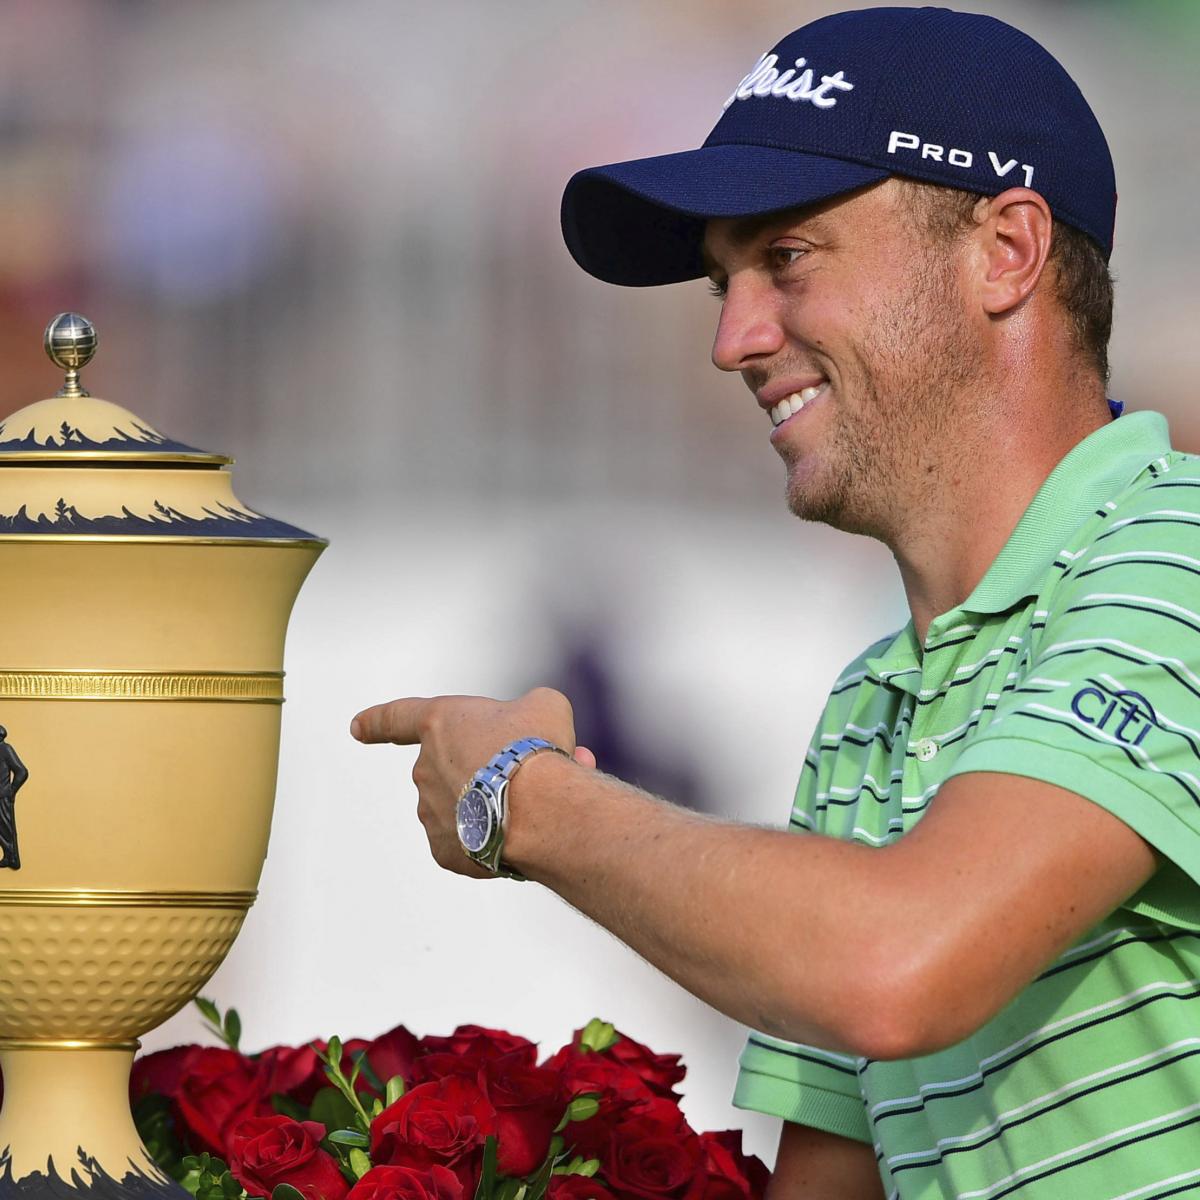 PGA Championship 2018 Tee Times, Date, TV Schedule and Prize Money